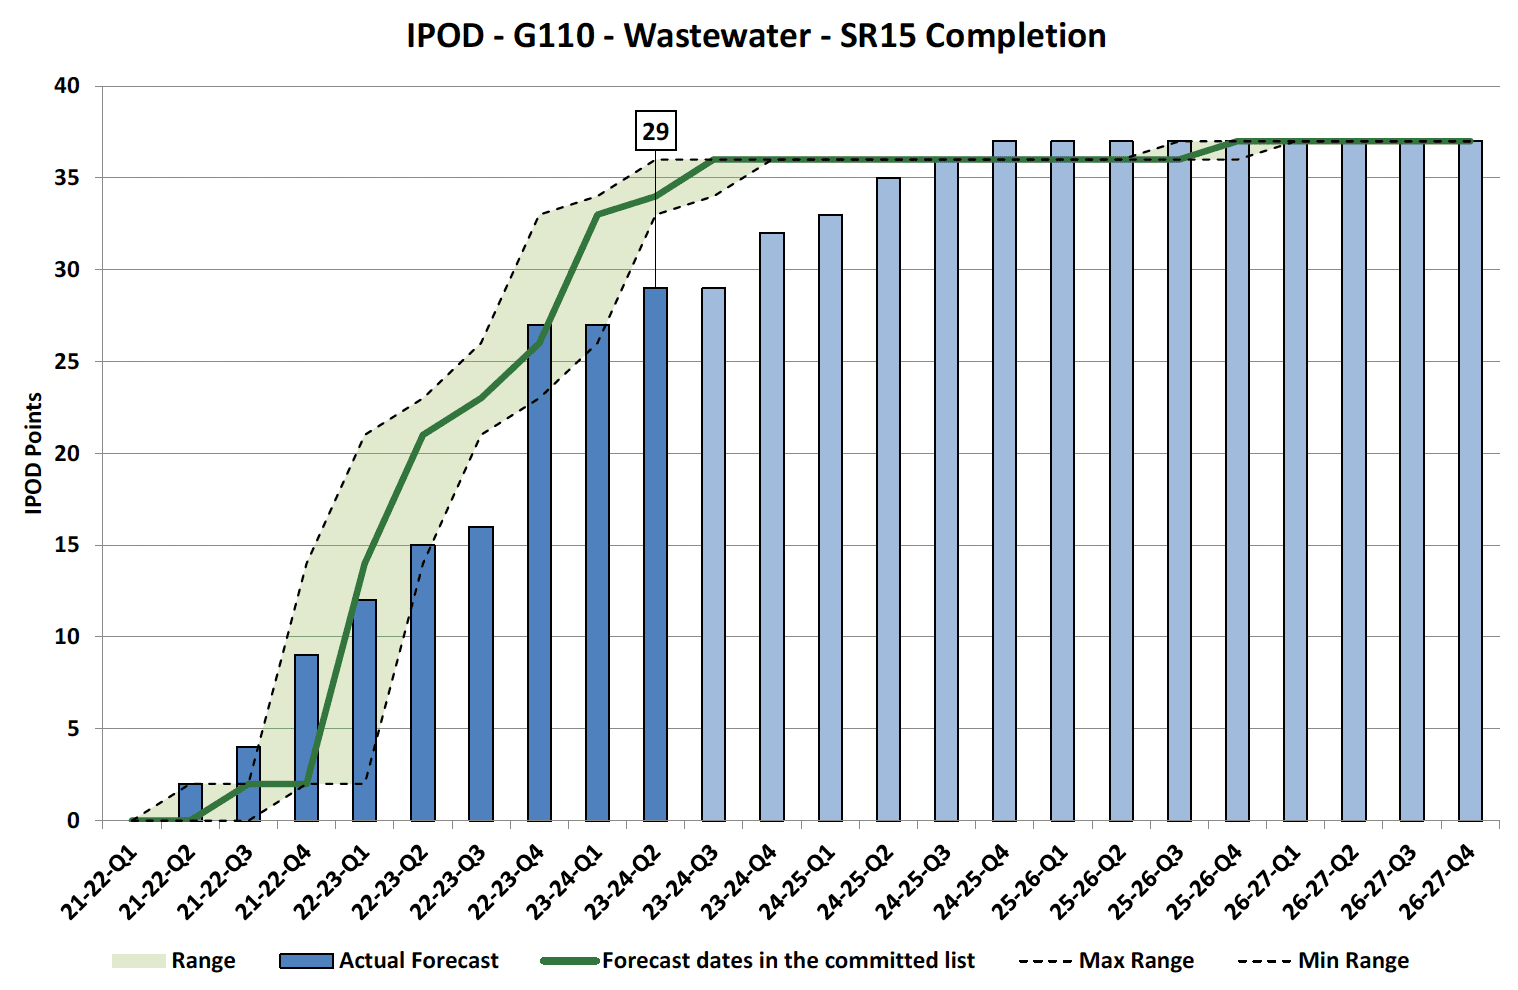 Chart showing IPOD points achieved or forecast for Financial Completion milestone against target range for SR15 Completion Projects in Wastewater Portfolio